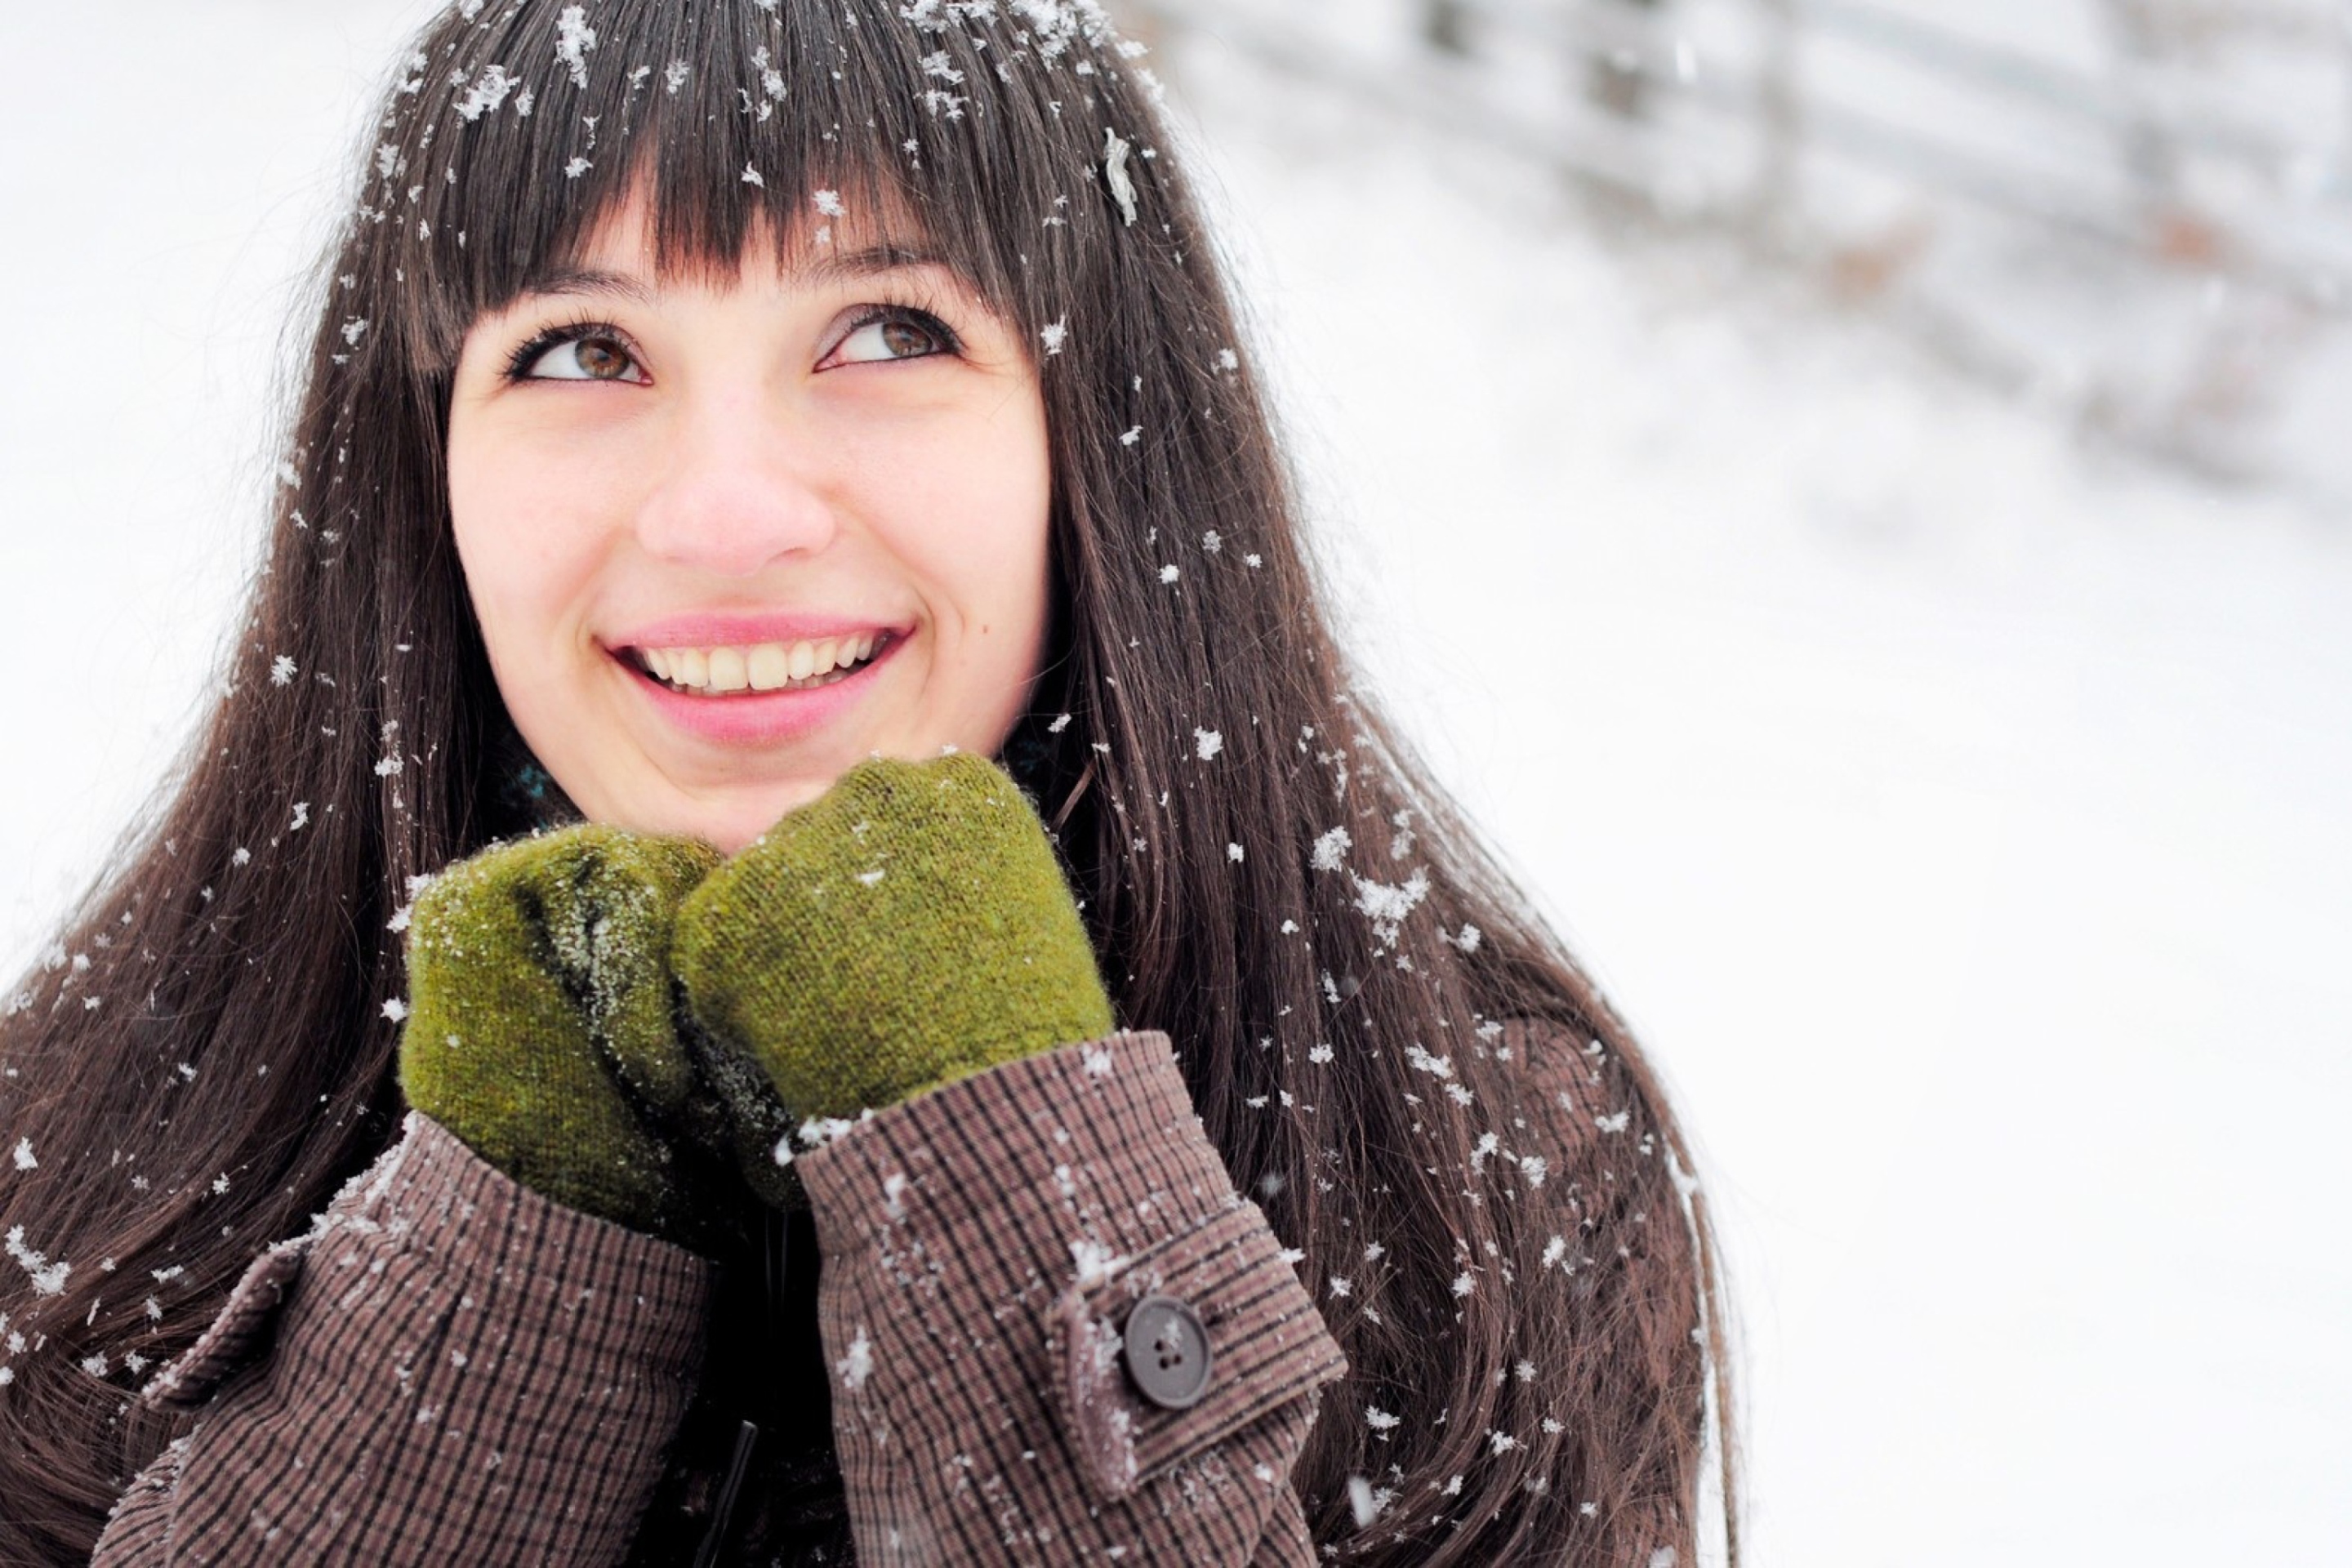 Brunette With Green Gloves In Snow screenshot #1 2880x1920